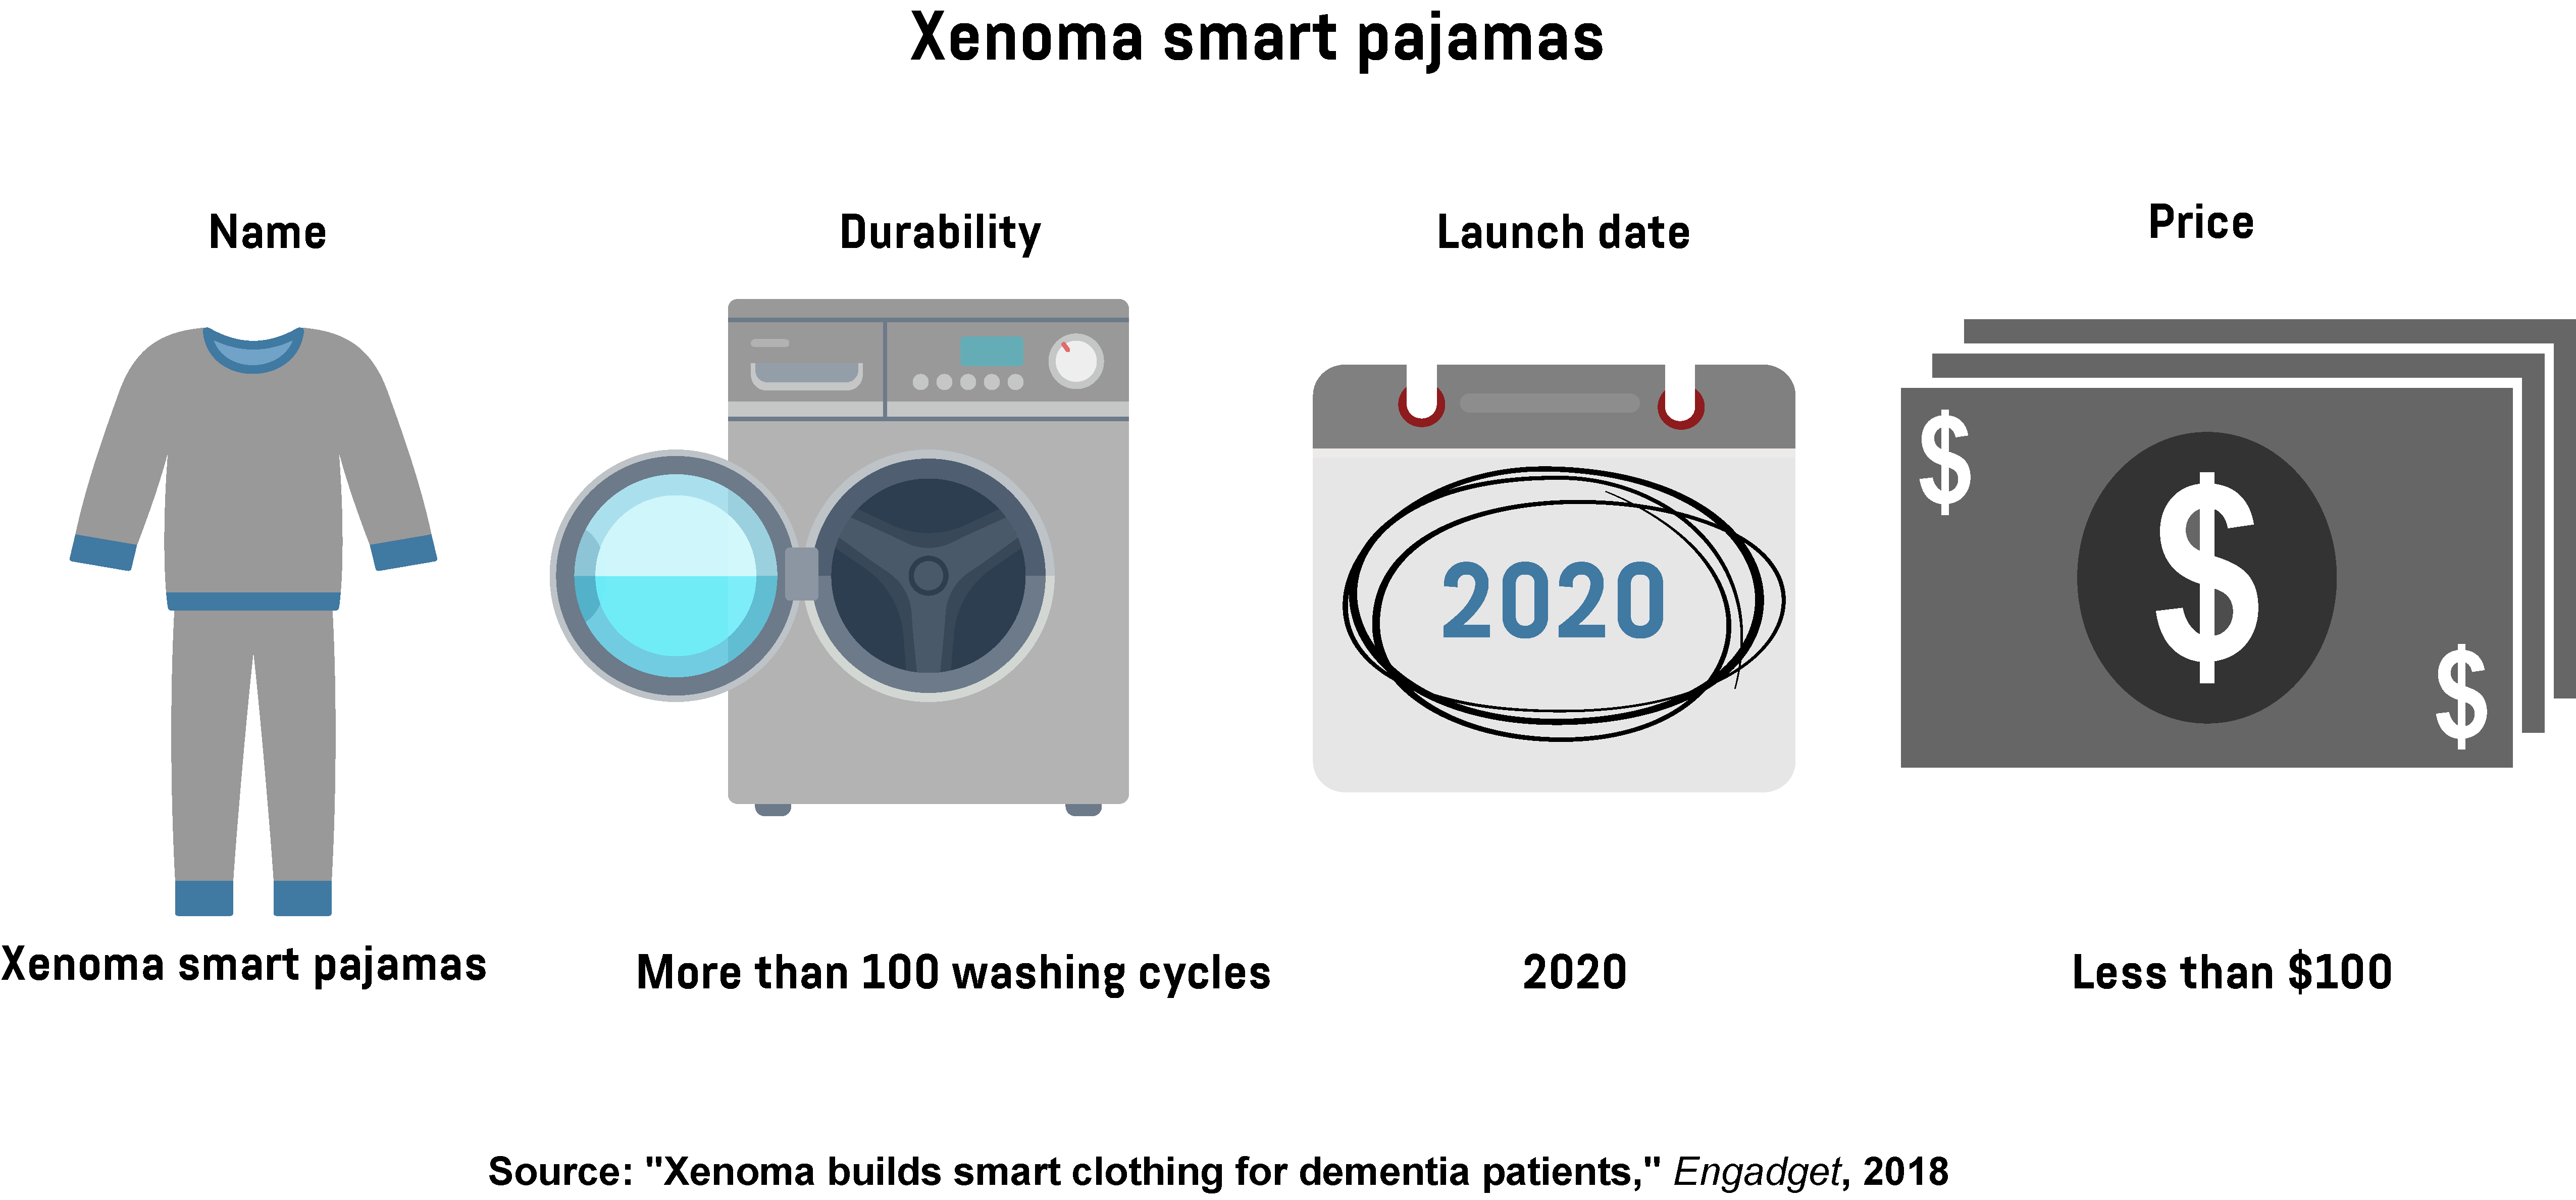 Infographic showing basic information about Xenoma’s smart pajamas, such as the launch date, price, and durability.